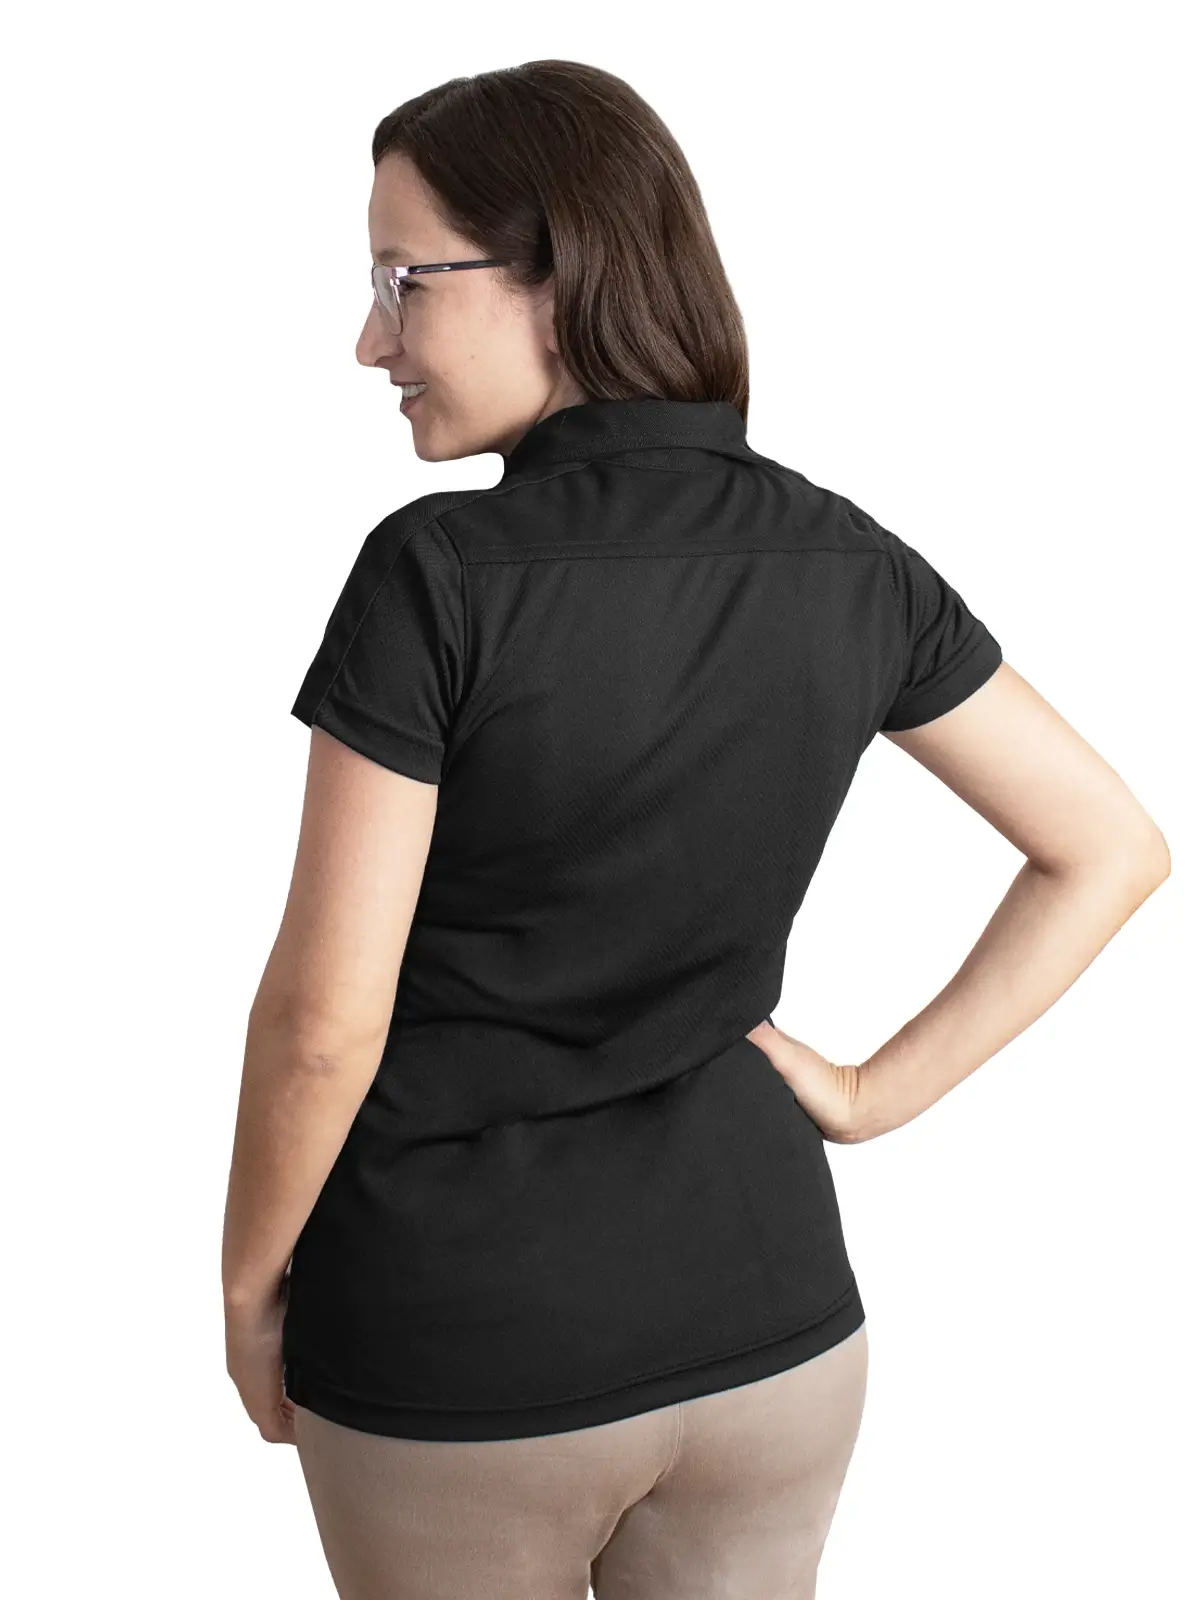 polo shirt golf for womens in black color